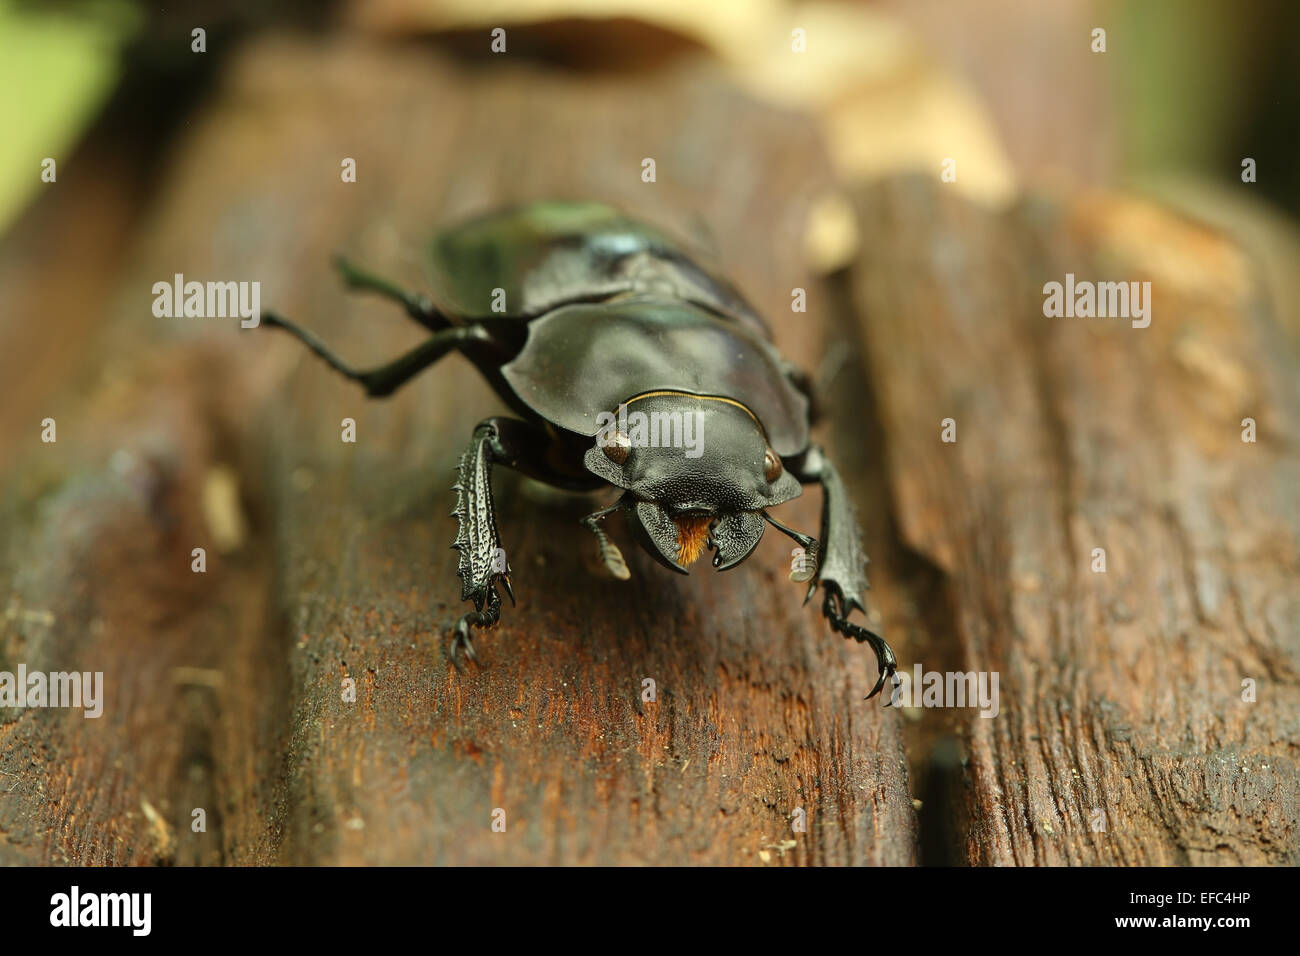 Beetle on wood in the forest Stock Photo